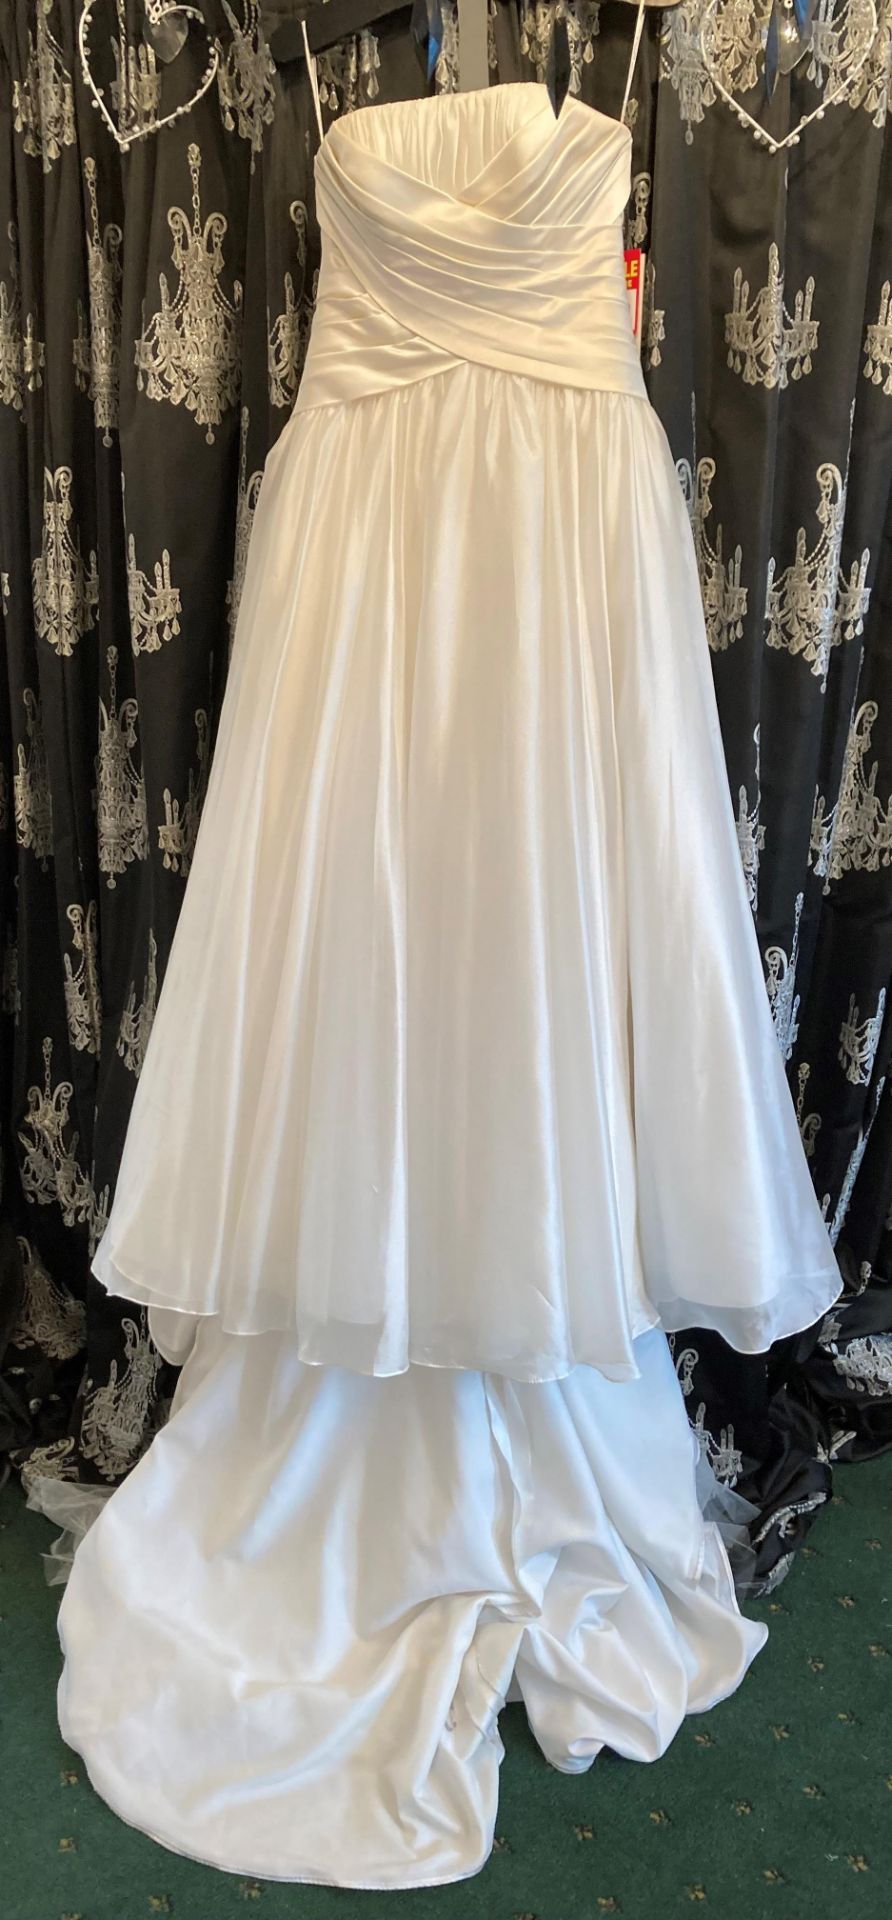 Maggie Sottero Couture ball gown, dark ivory, size UK 12 - with matching belt.